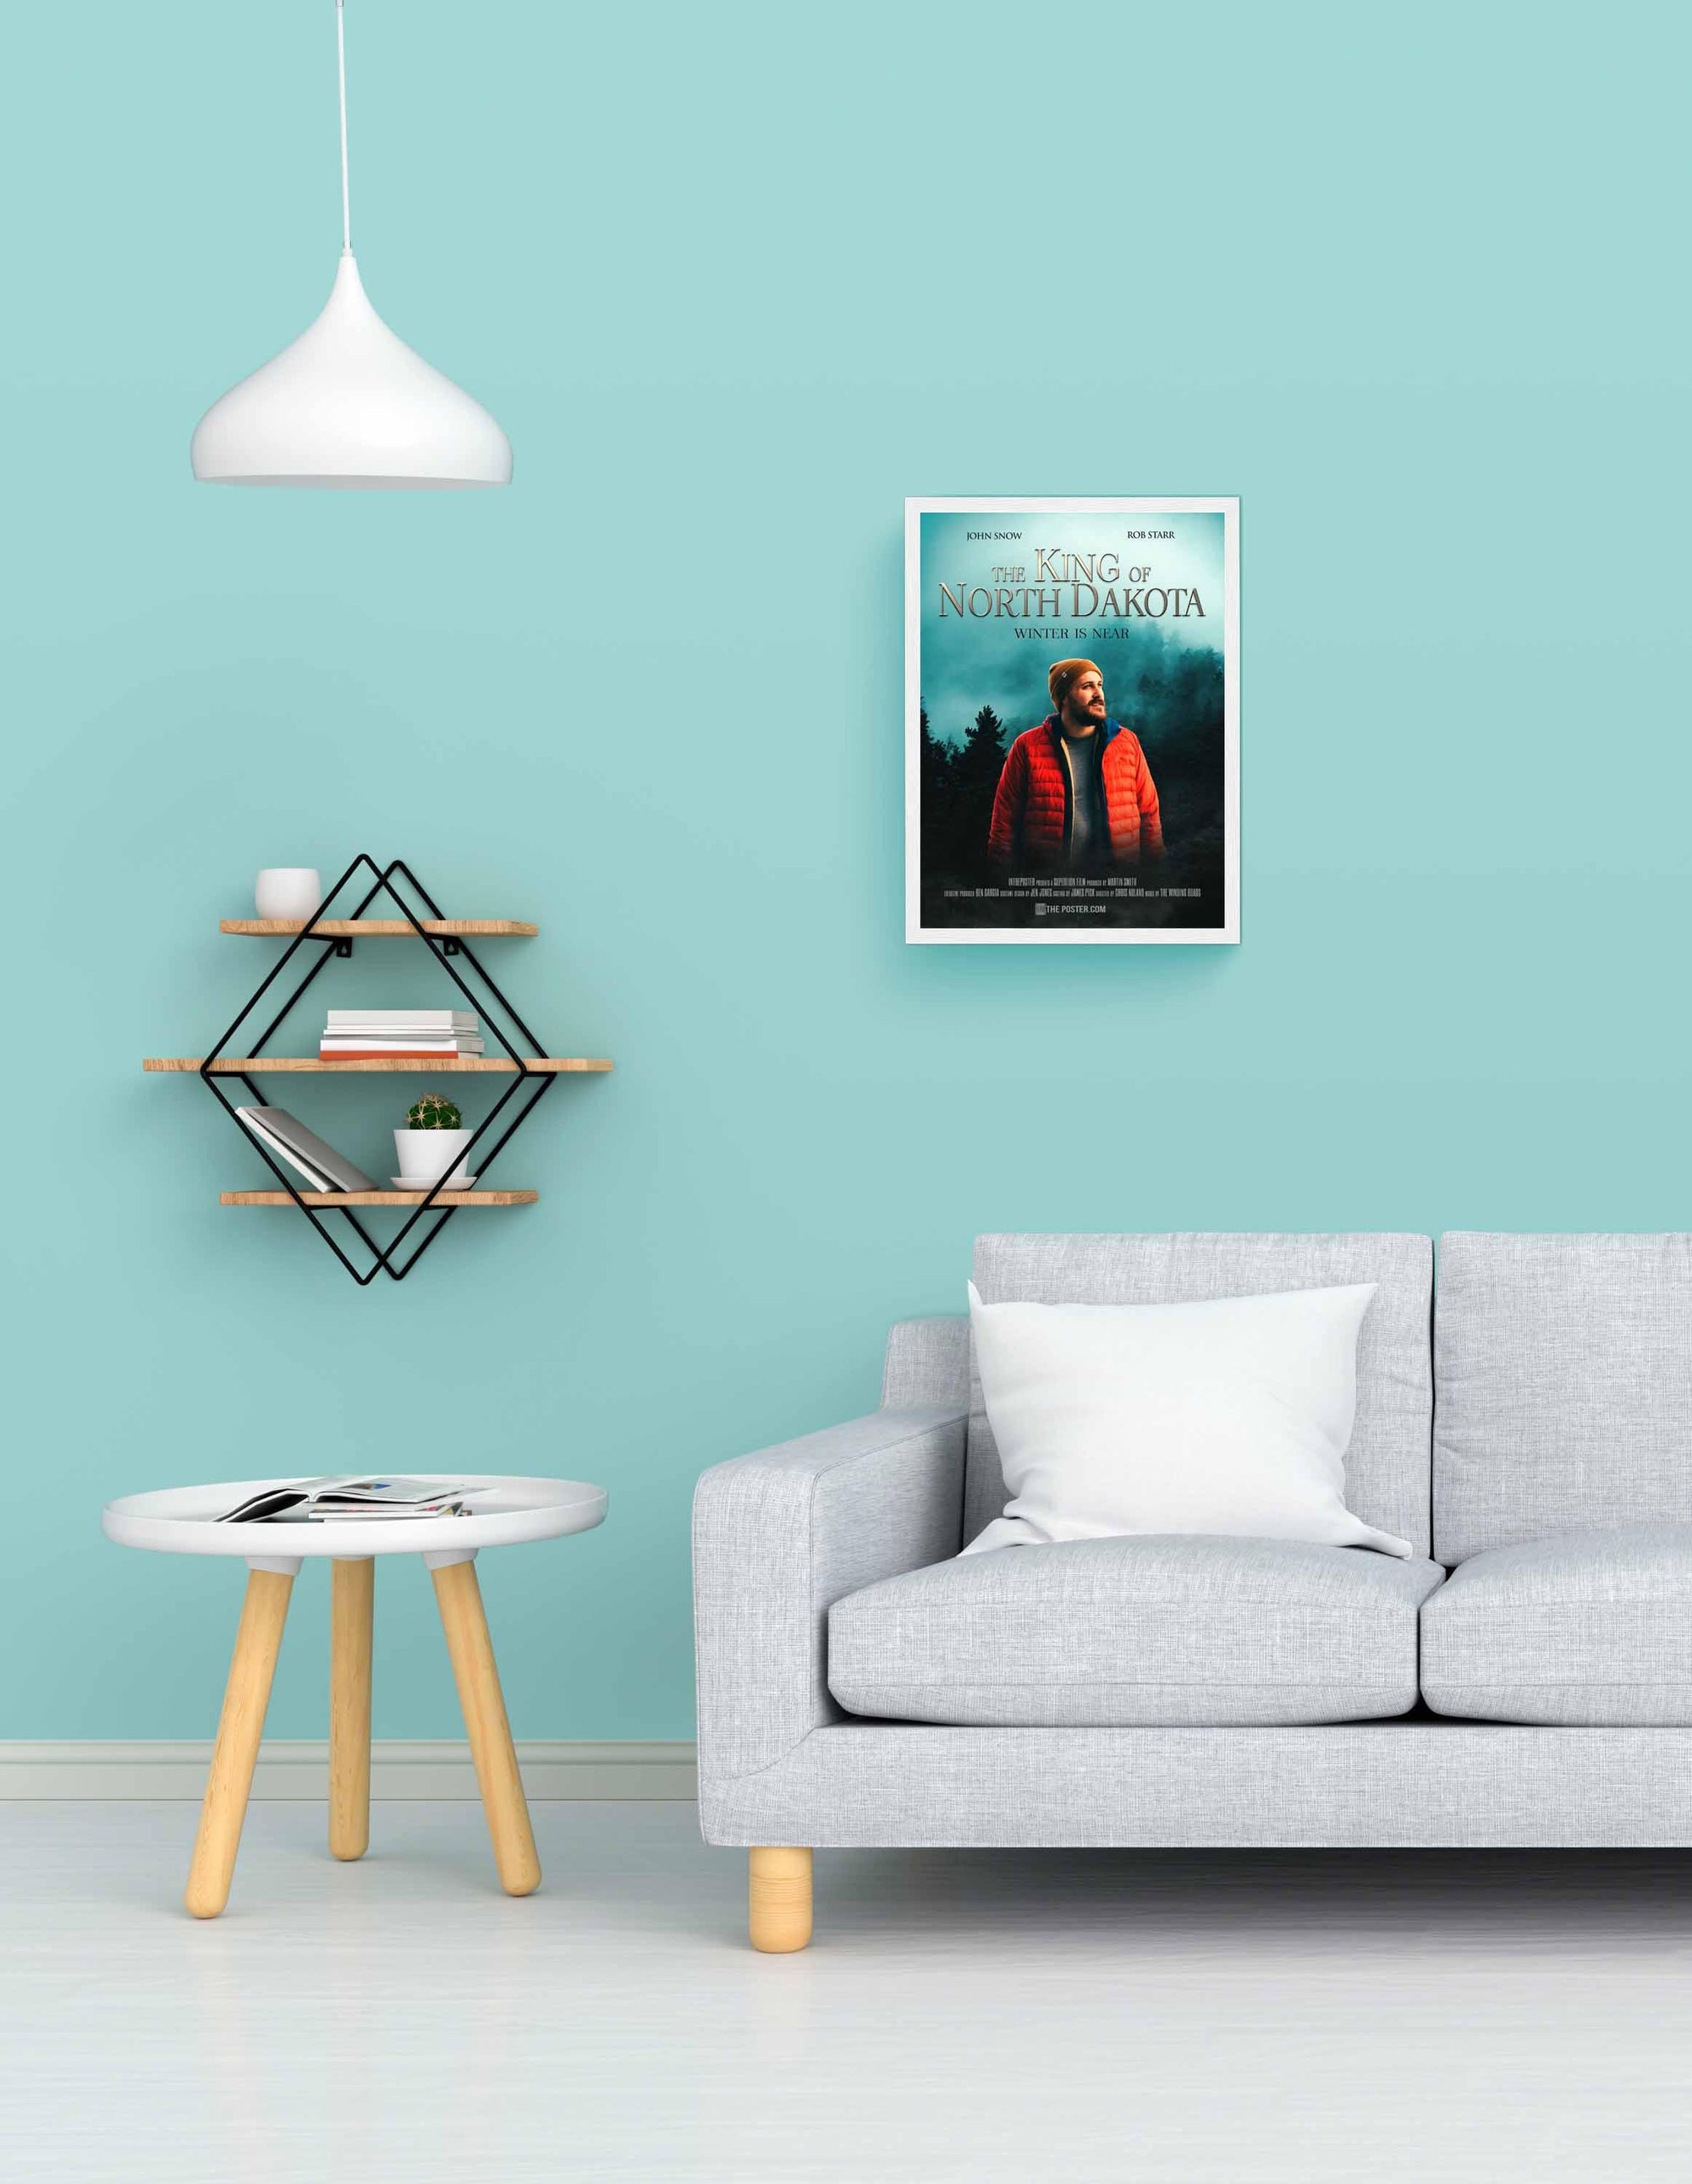 Fantasy custom movie poster in a white small frame on a blue wall above a grey sofa